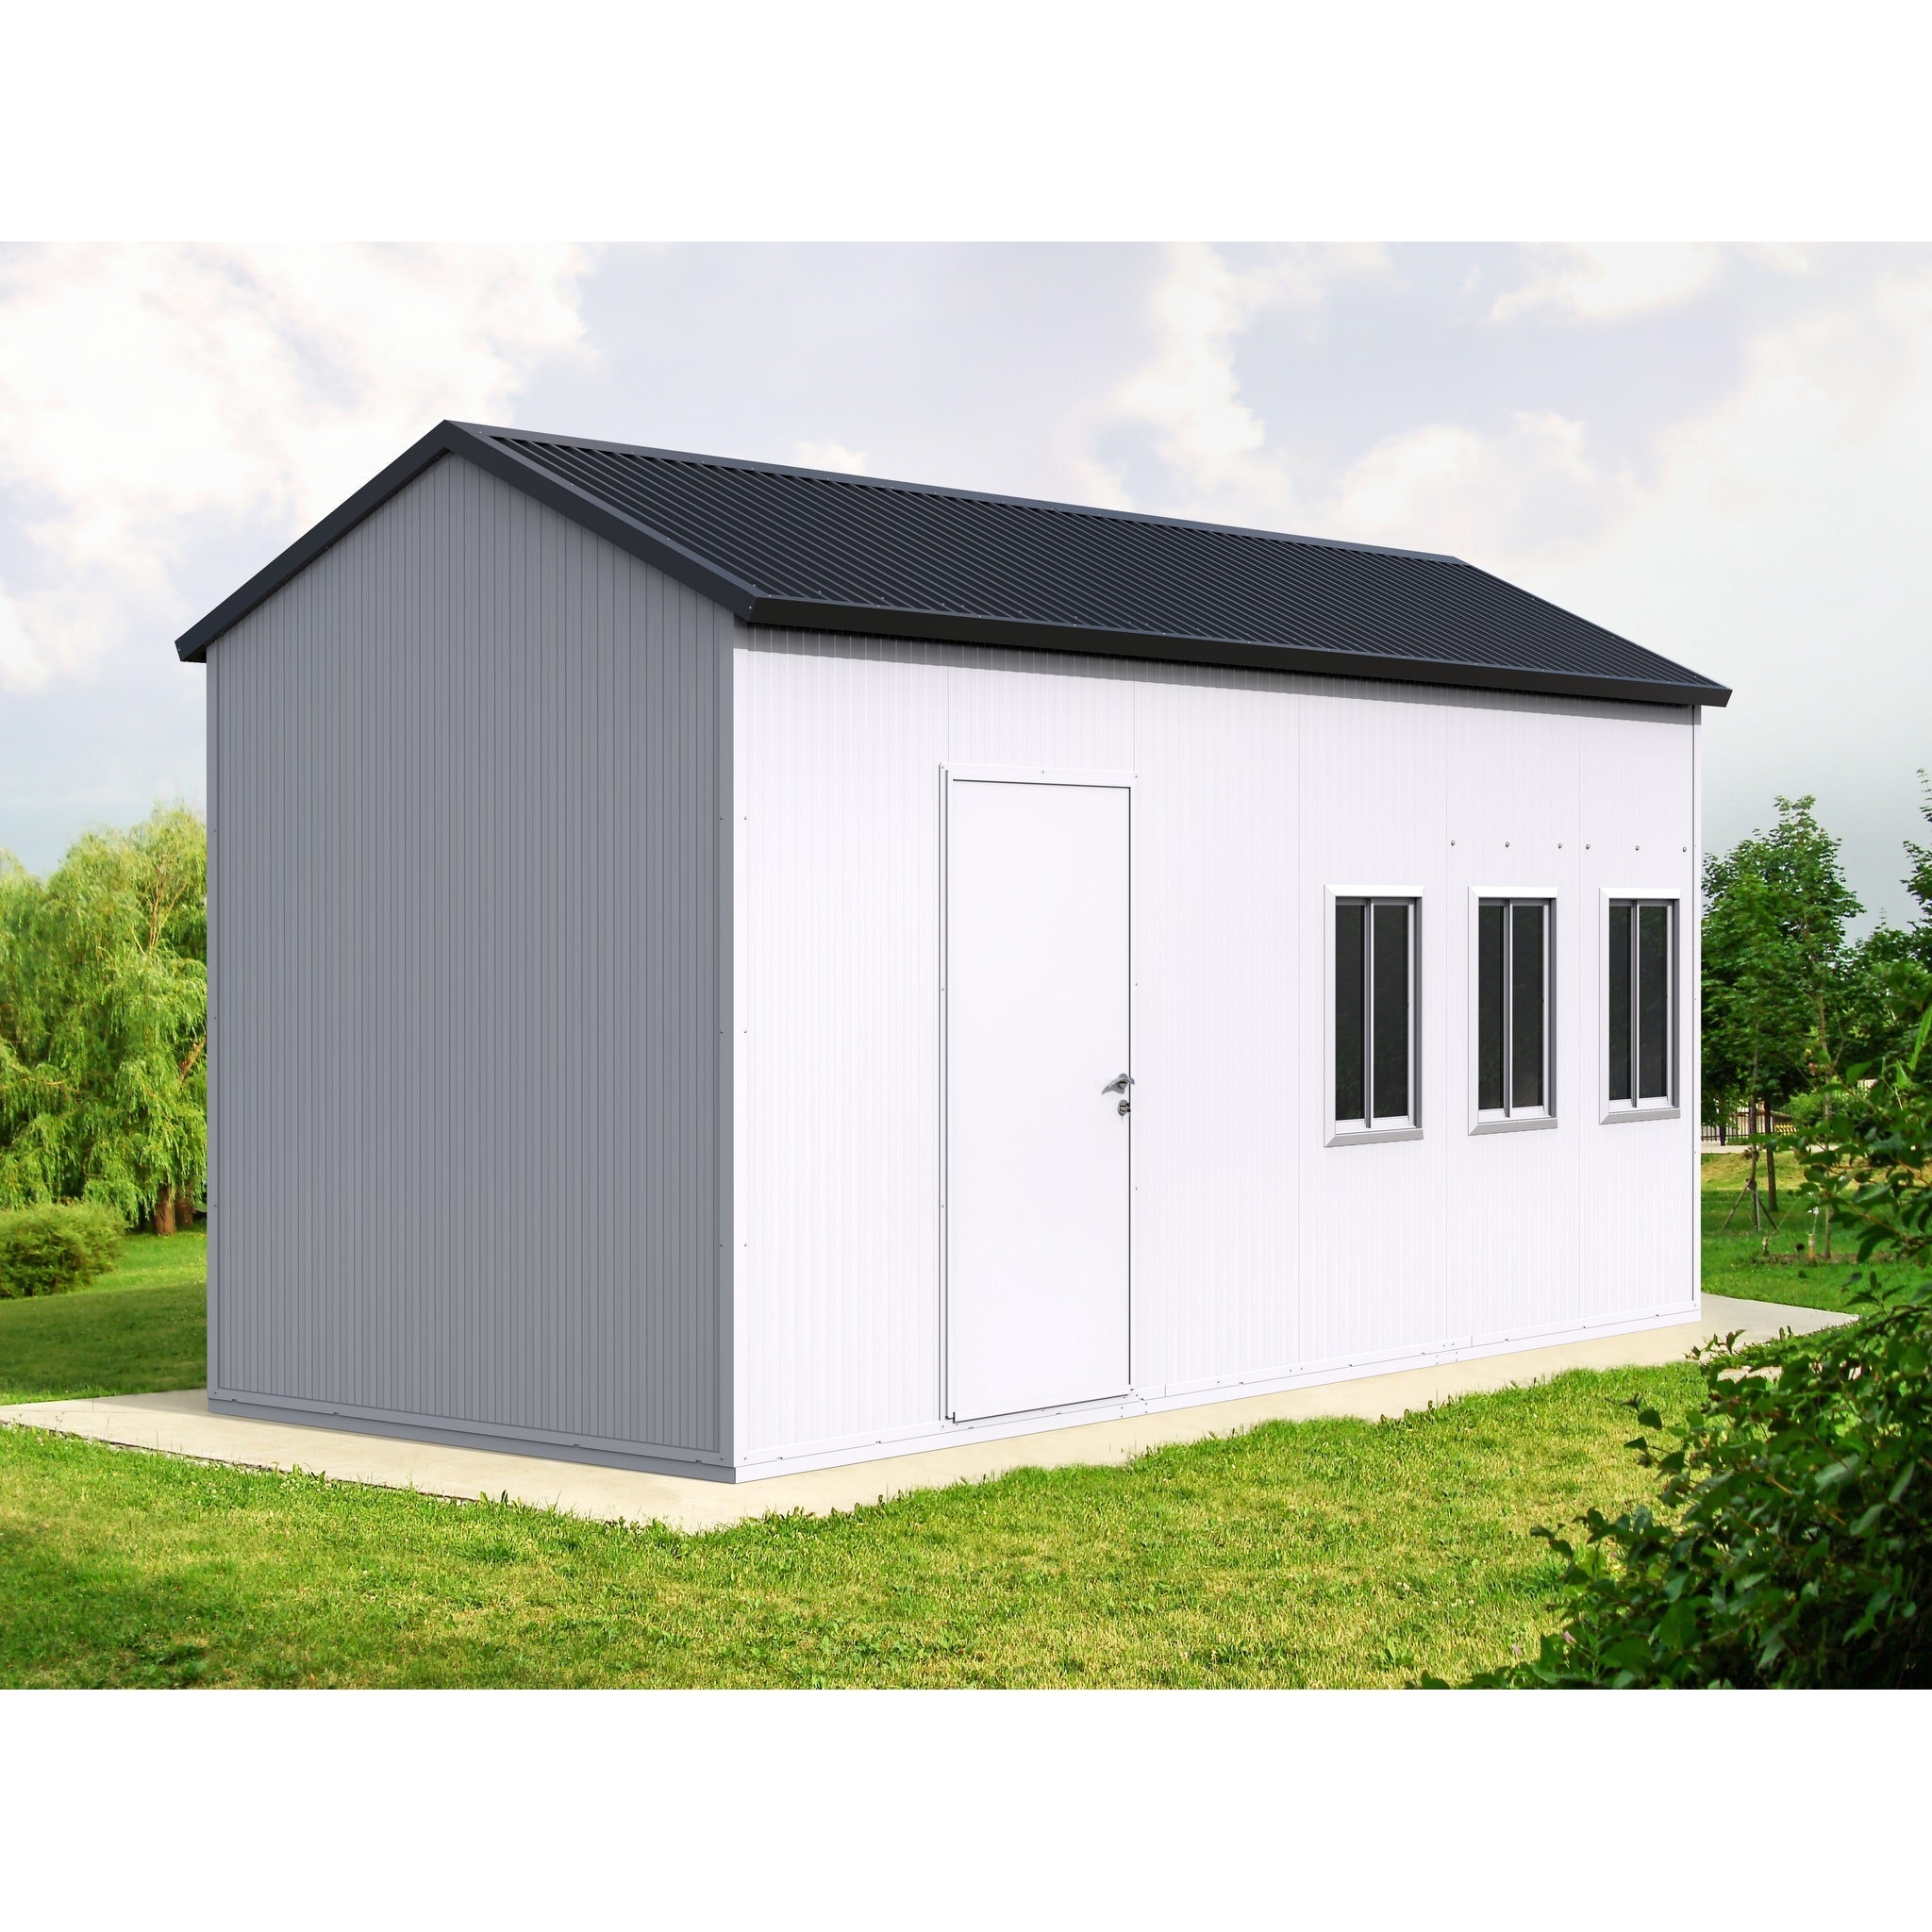 Duramax Insulated Buildings BOSS Gable Roof Tiny House/Insulated Building 8.5' x 20'